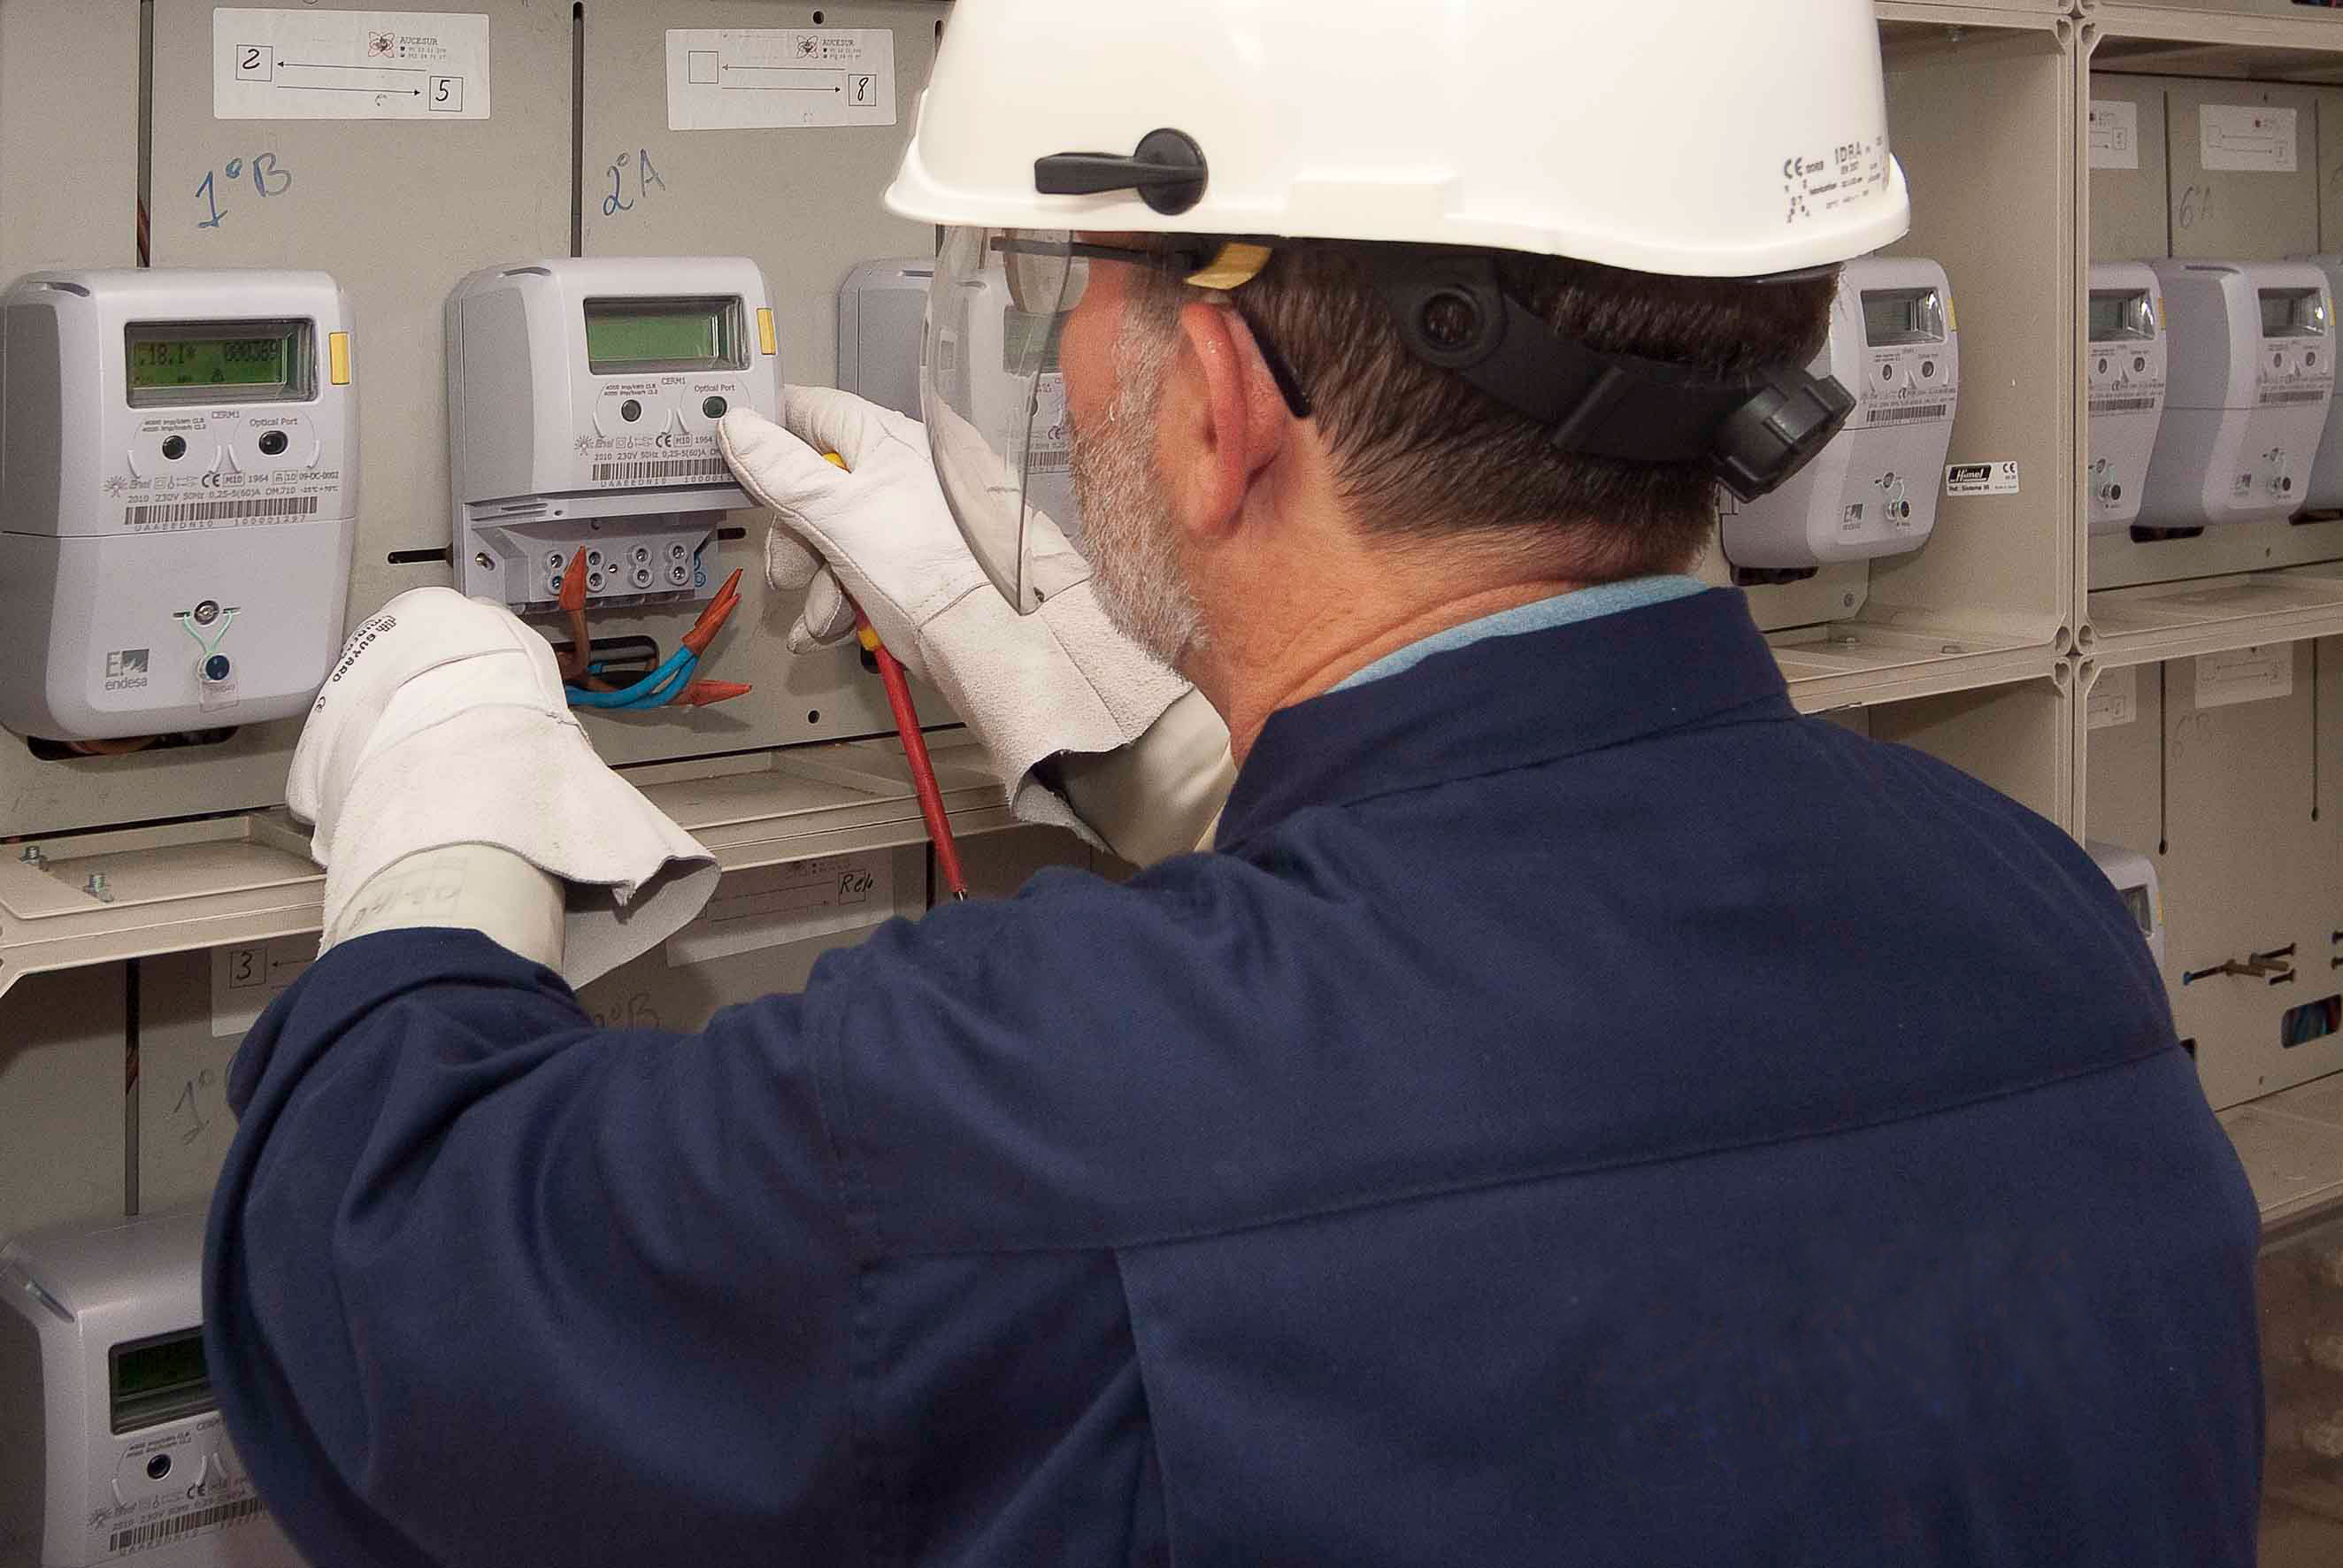 Operator working with a measurement equipment in a meter centralization